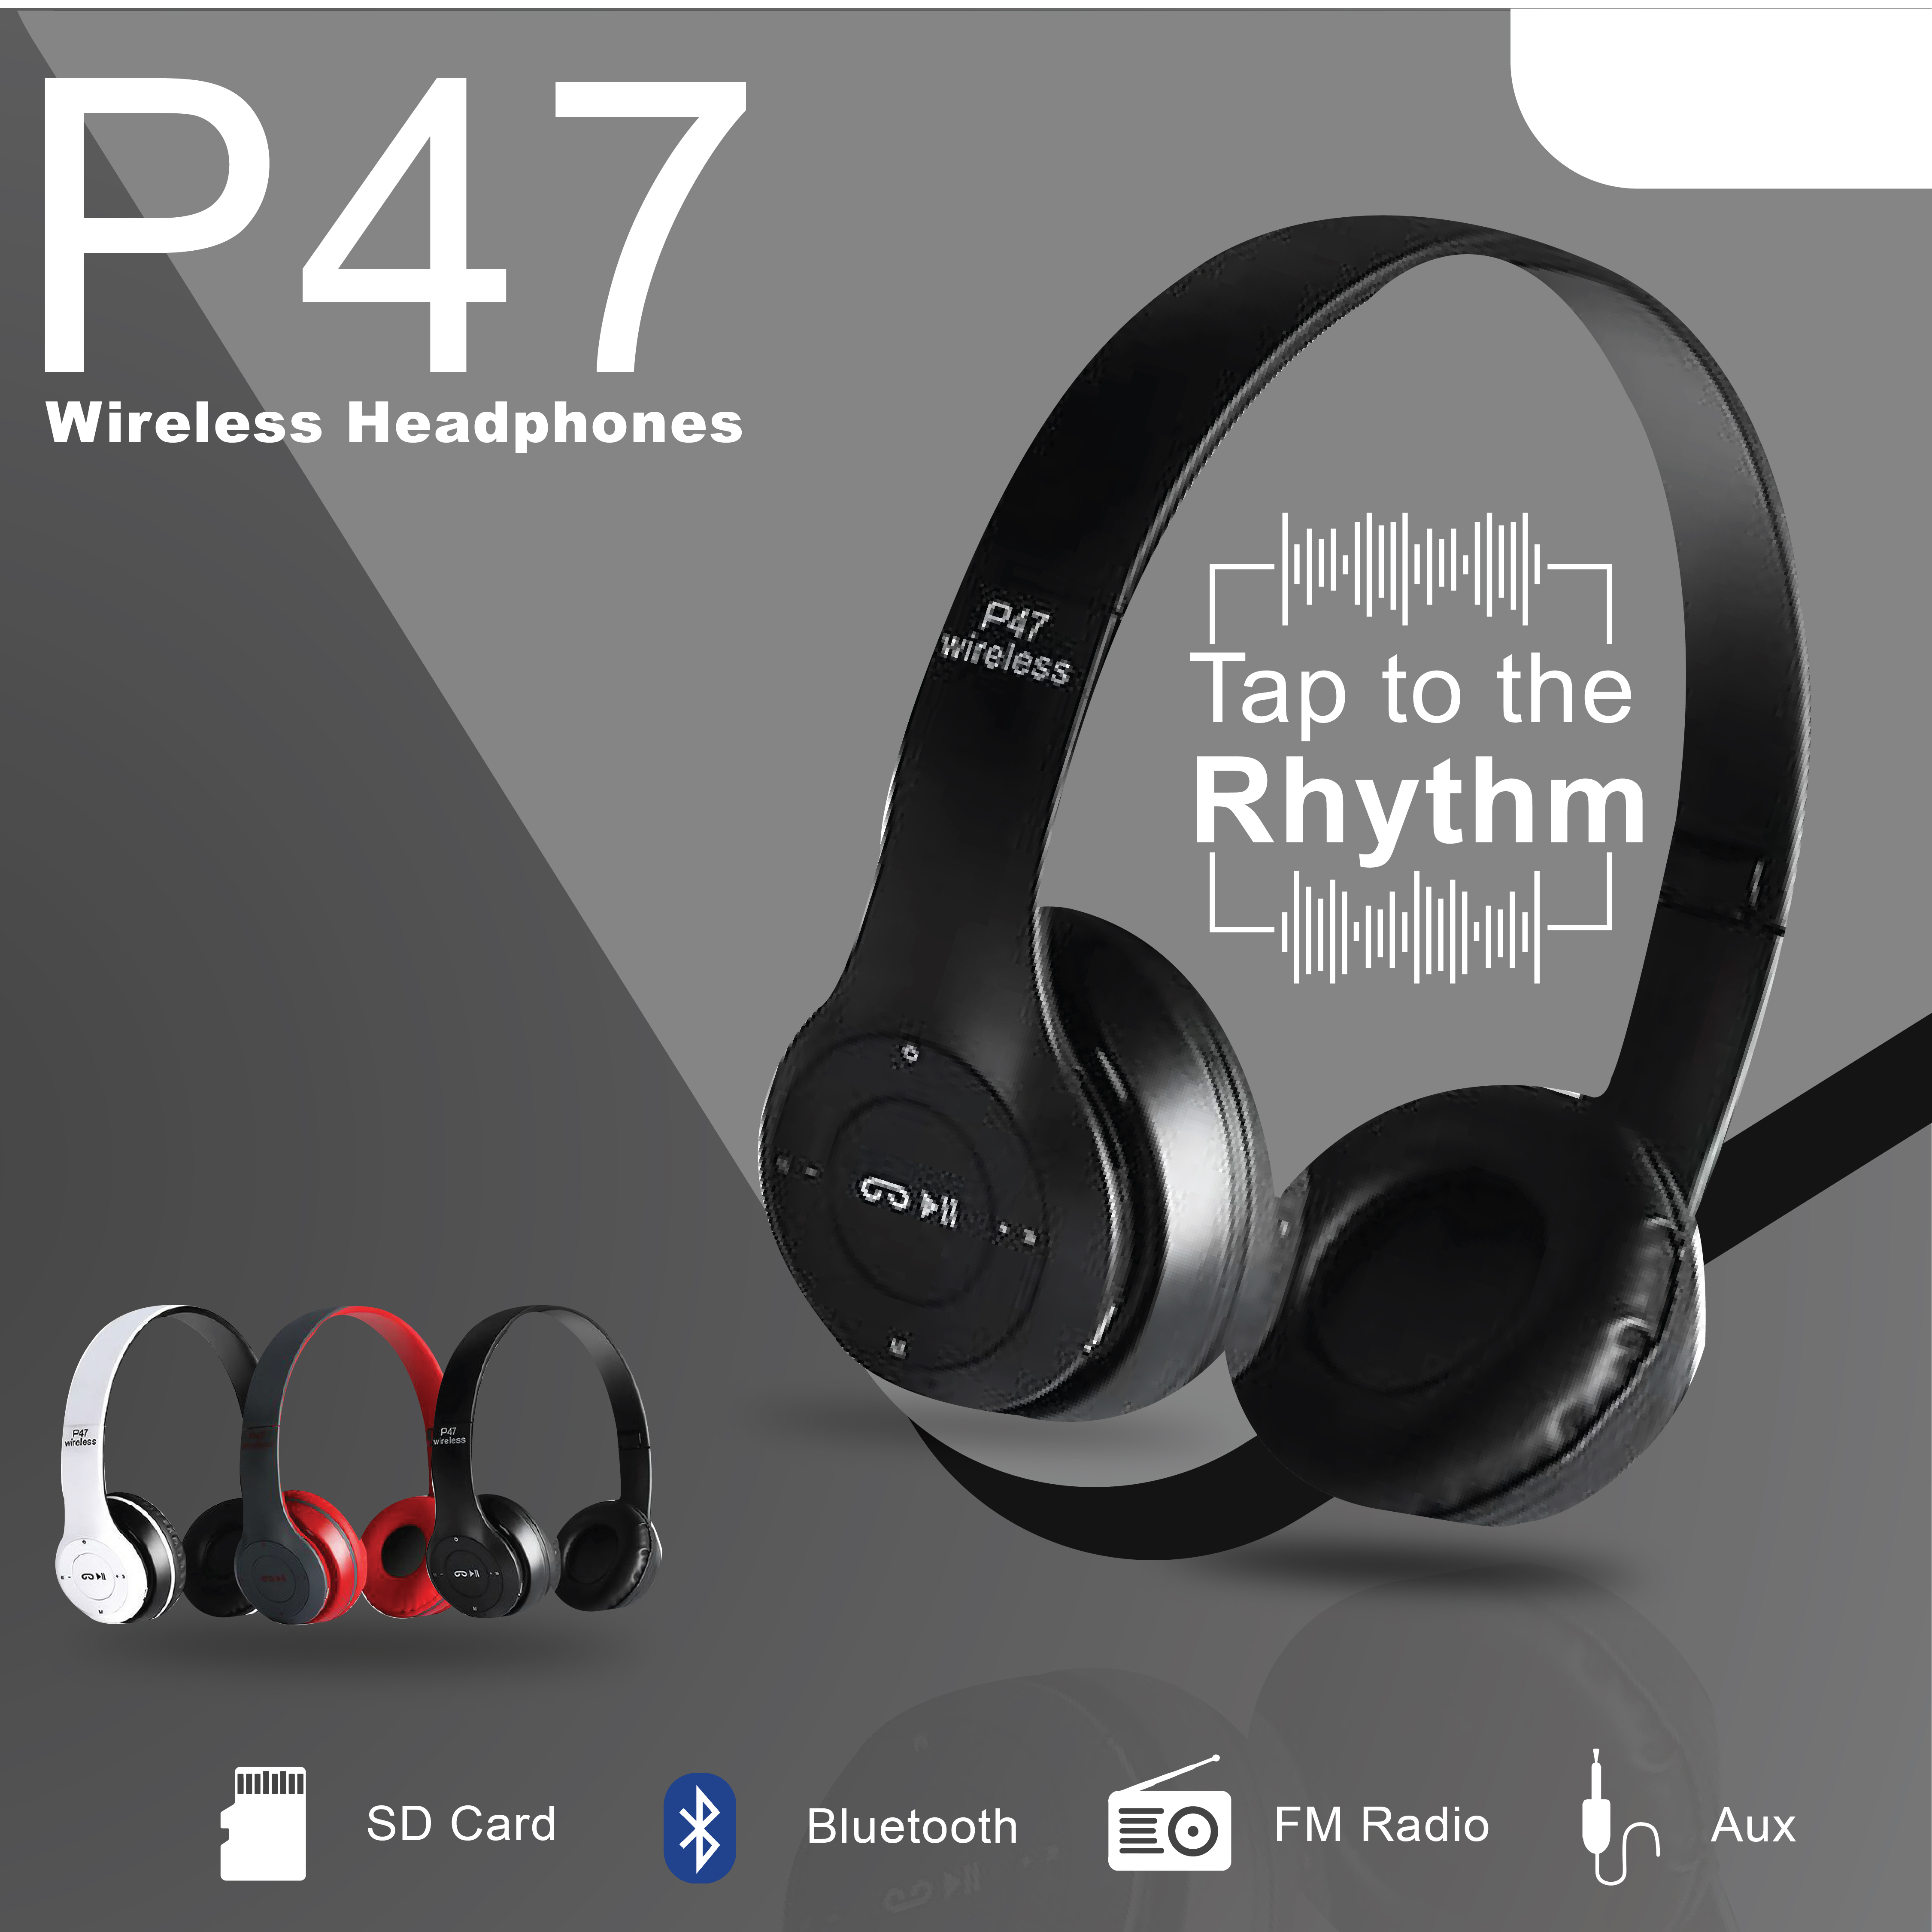 Wireless Headphones, P47 Bluetooth Wireless Headphones, Stereo Headphones with Mic, Foldable Headset with Built-in Microphone, Wireless Earphones, 5.0+EDR Technology, Supports TF Card / FM Radio, Compatible with PC, TV, Smart Phones & Tablets